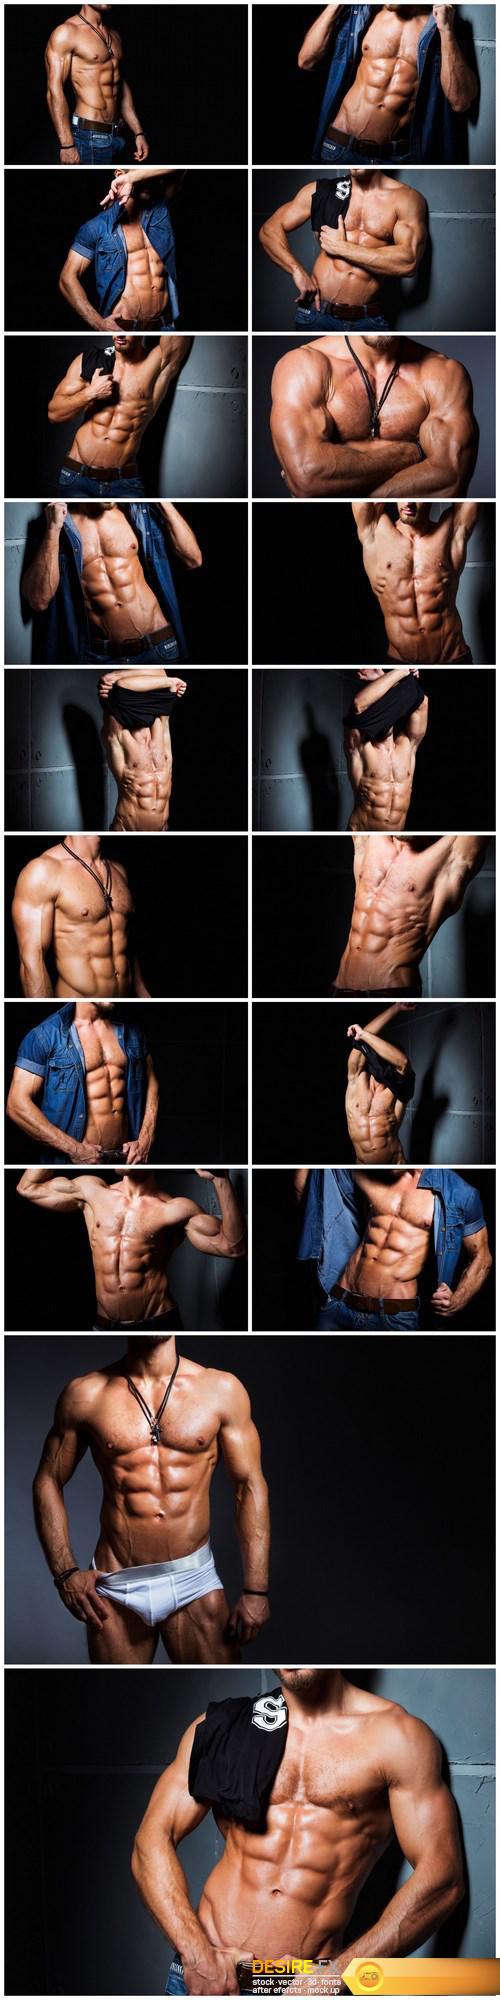 Muscular and sexy torso of young man having perfect abs 2 - 18xUHQ JPEG